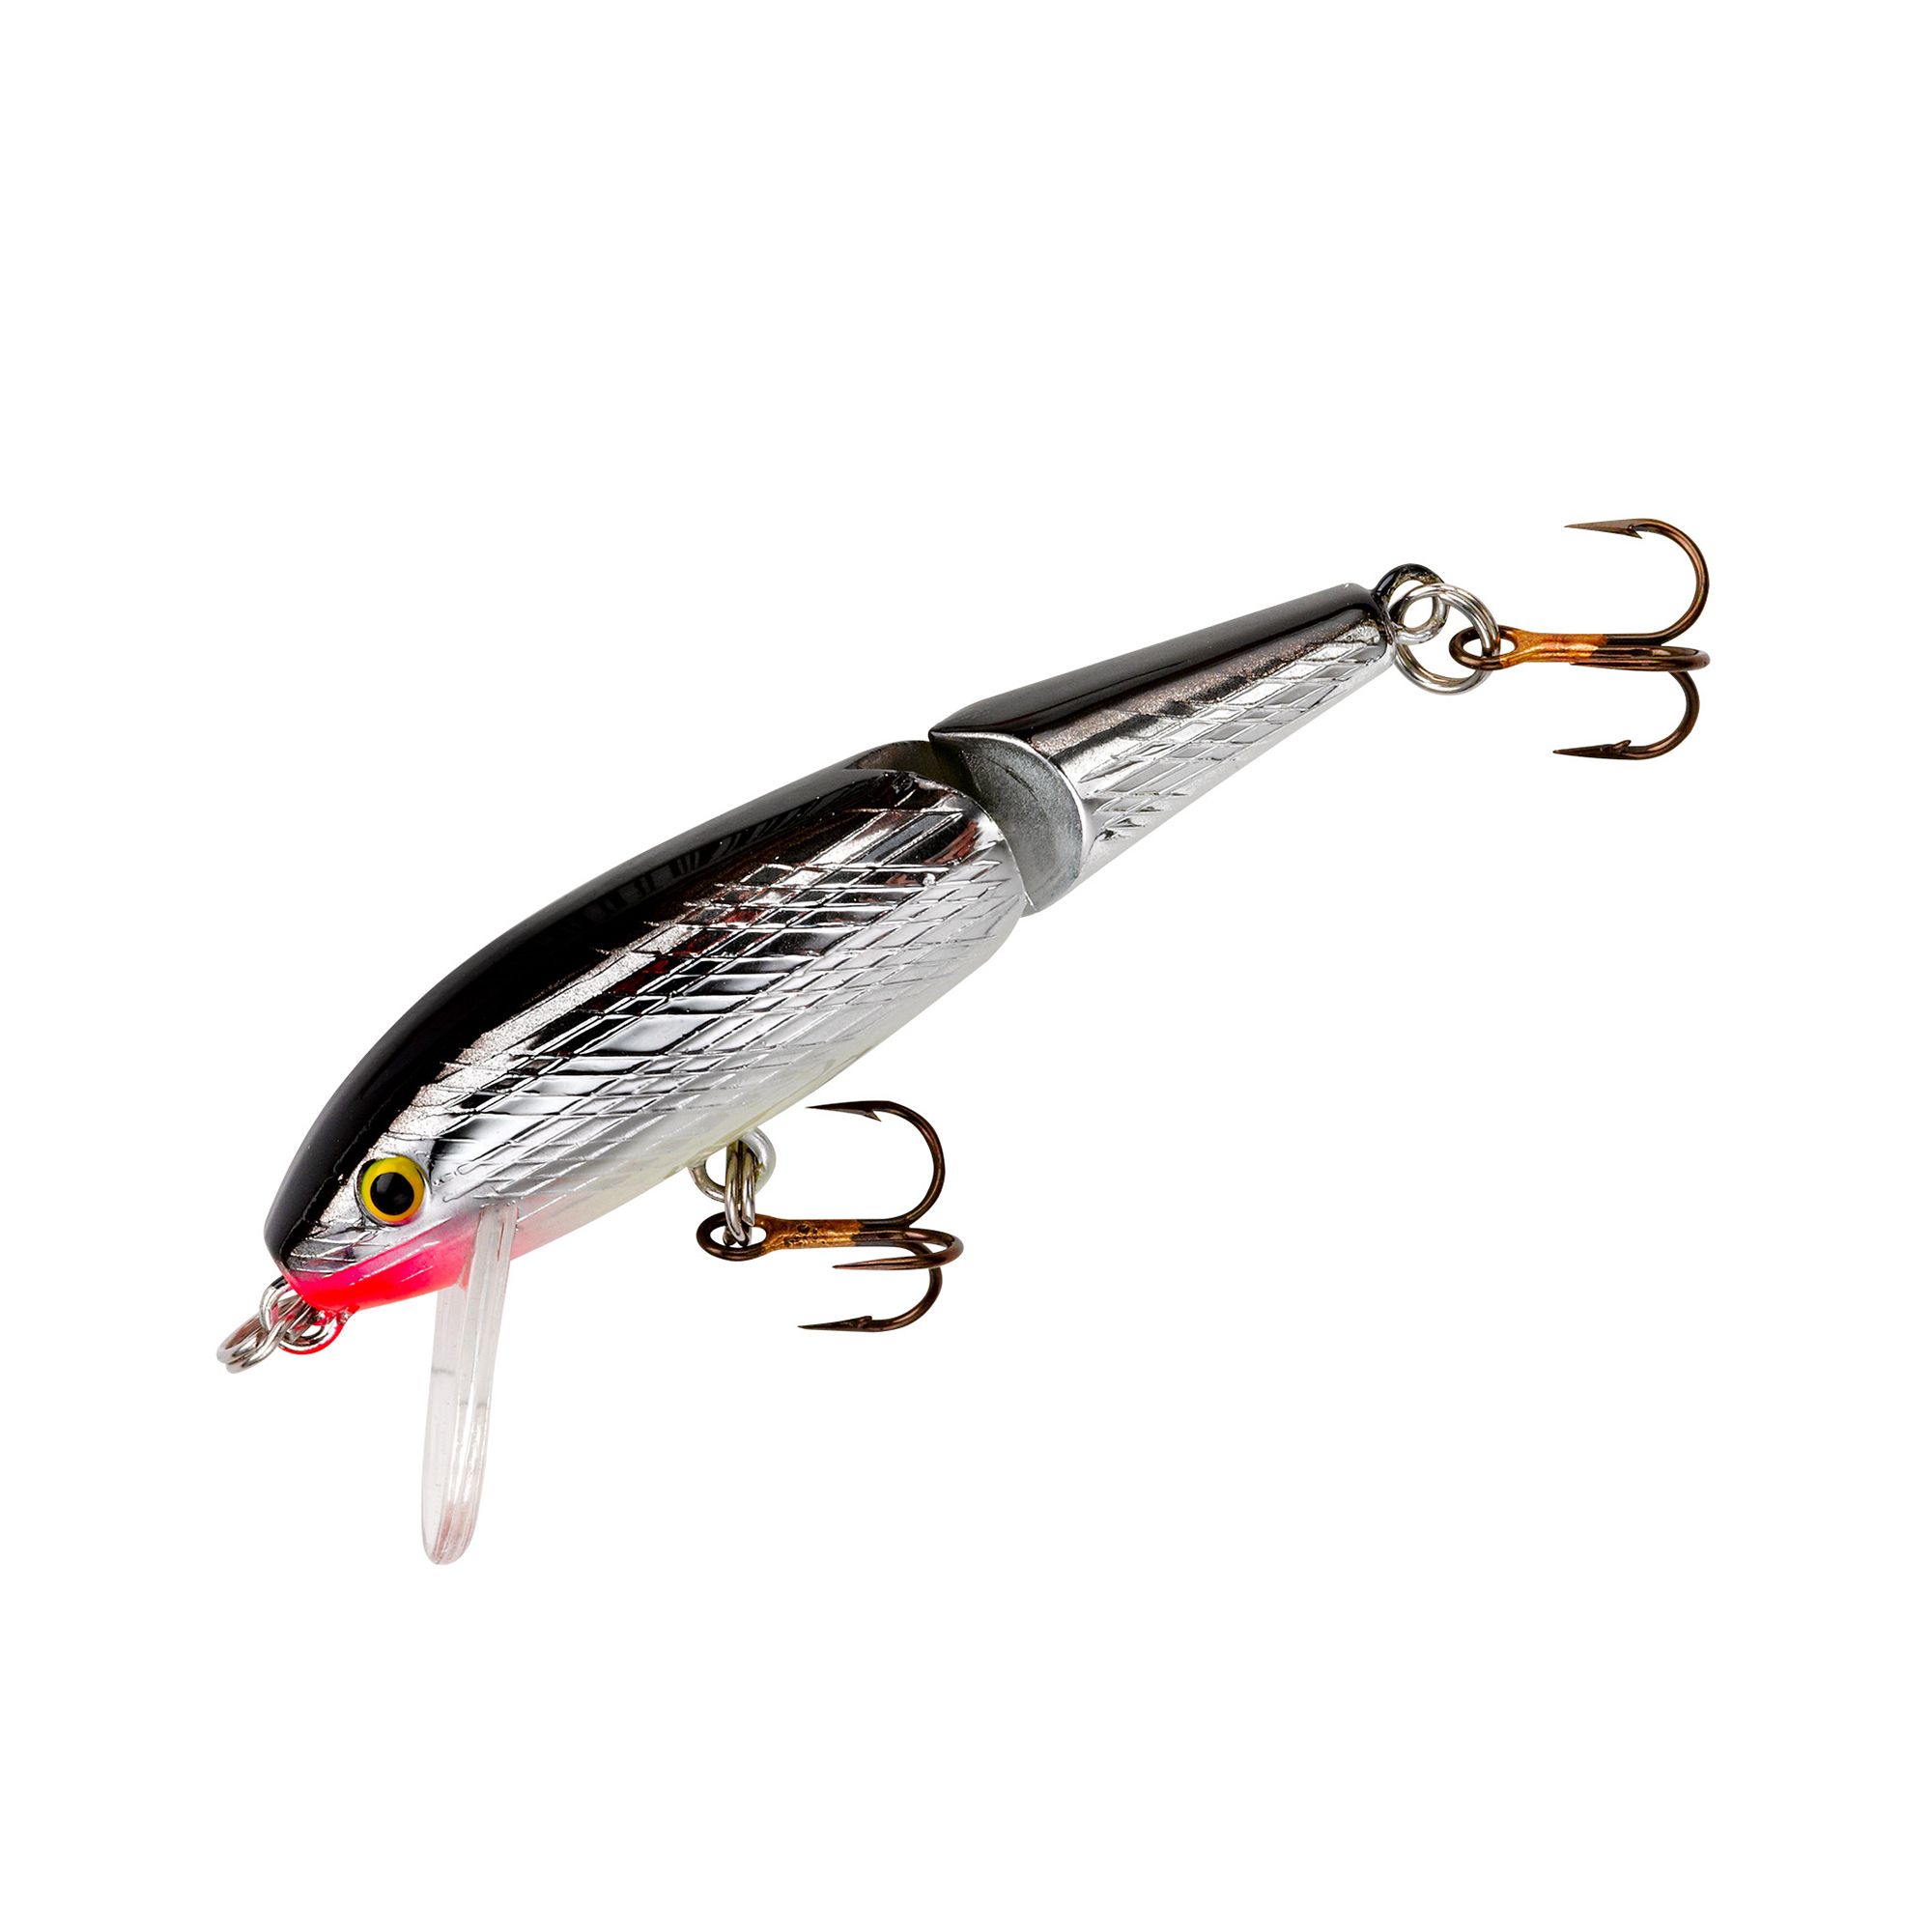 Dick's Sporting Goods Rebel Jointed Minnow Hard Bait